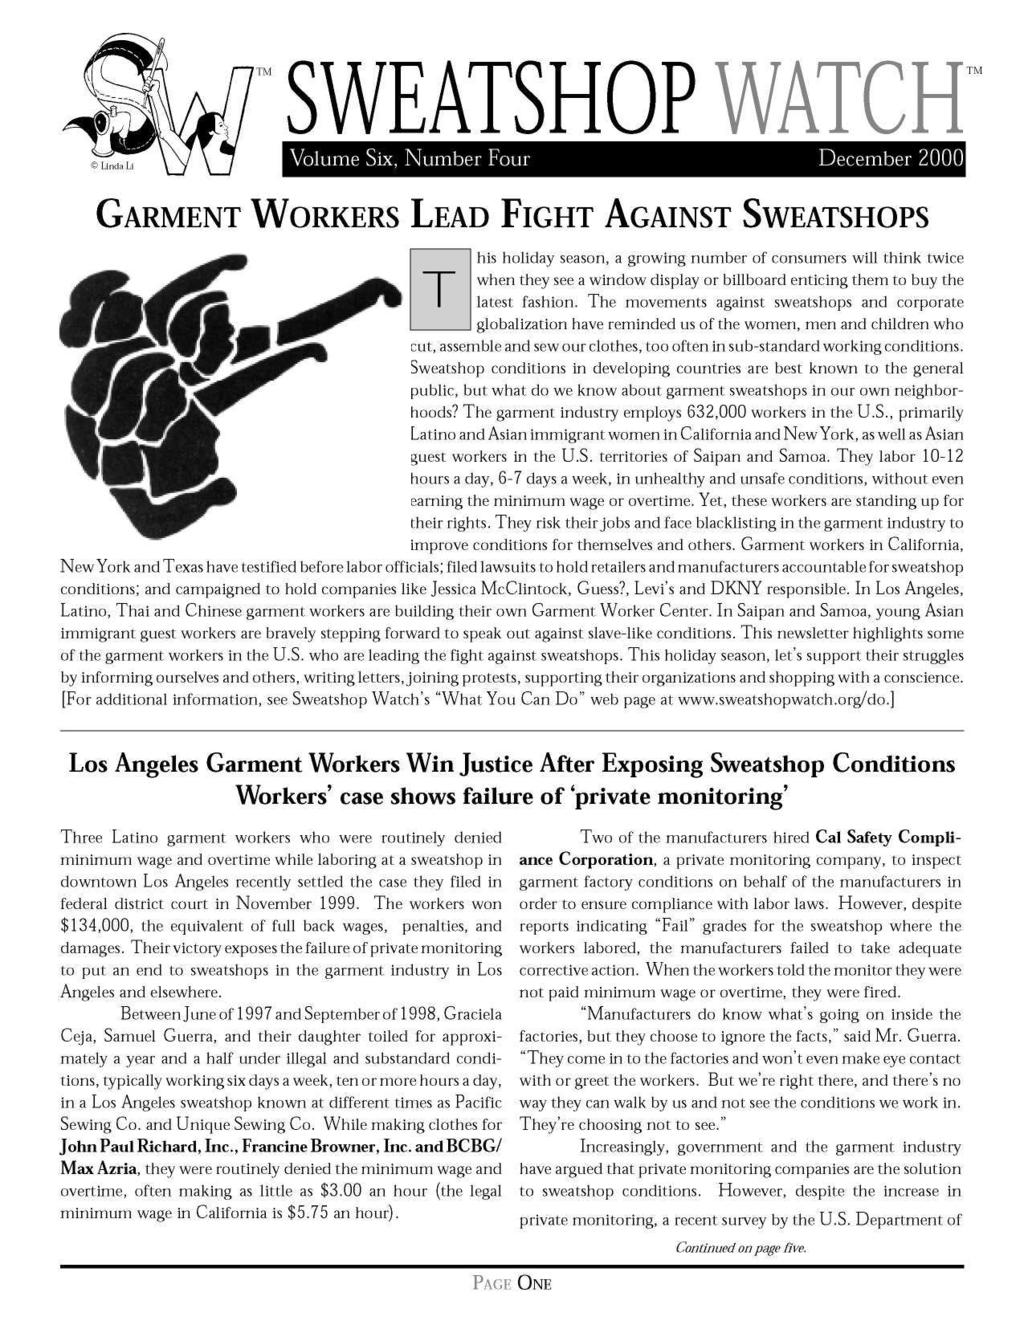 TM SWEATSHOP WATCH Volume Six, Number Four December 2000 TM GARMENT WORKERS LEAD FIGHT AGAINST SWEATSHOPS T his holiday season, a growing number of consumers will think twice when they see a window